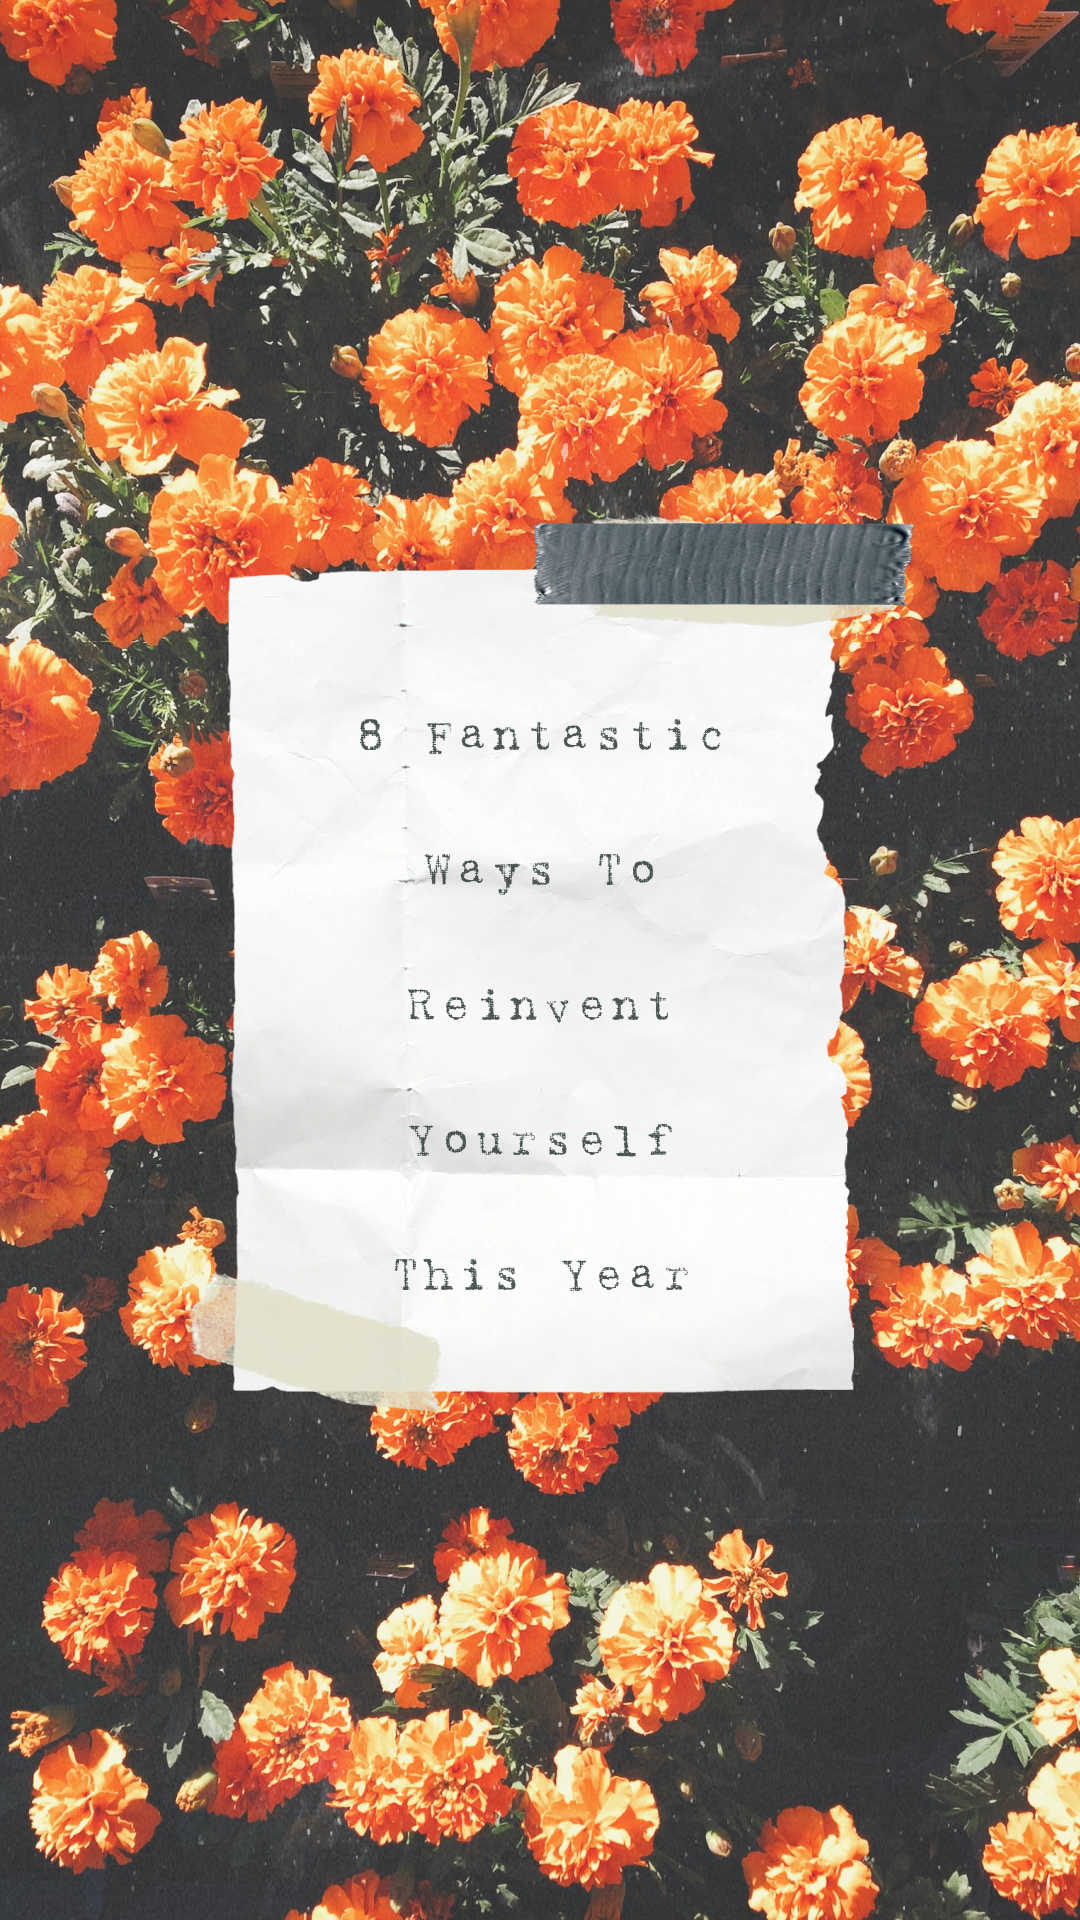 8 Fantastic Ways To Reinvent Yourself This Year  Image Source There comes a point in everyone's lives when they feel a change of direction is necessary. Everyone needs motivation and stimulation in their daily lives to ensure they continue to have a sense of purpose (and achievement). If you don't feel particularly satisfied with your life these days, it might be time for you to "reinvent" yourself. Did you know there are many ways that you can achieve that goal? Take a look at the following powerful examples to give you an inspirational head-start on what you can do to create a better you: 1. Move To A Different Area It's no secret that your location could be holding you back. How is that so, you might ask yourself? If you live in a rural area, for instance, you may find that career opportunities and social activities are somewhat limited. In such a scenario, now would be the perfect opportunity to broaden your horizons by moving somewhere new, such as a bustling city or a large town. You'll soon find opportunities in abundance for all kinds of things. 2. Forge A New Career Path Do you feel like you're going through the motions at work? Does each day seem no different from the previous one? If the answer to both questions is yes, you may find that your chosen career path is somewhat stagnant. It may surprise you to learn that you'll likely have plenty of skills that you can transfer to other types of jobs. If you're an IT consultant, you could forge a new career in construction or engineering. People who drive professionally could consider moving into driving tuition roles. The options are limitless. 3. Enhance Your Looks Some people may feel the one thing they lack in their lives is confidence in their looks. If that rings true to you, don't worry because there's plenty you can do to reinvent yourself and enhance your looks and personal style. One example might be to pay a visit to your nearest infinity laser spa for help dealing with hair removal. Another may be to check out your nearest weightloss club to lose a few pounds and achieve the figure you've always desired. 4. Get Life Coaching From The Experts There's no denying that success is a metric measured in all kinds of ways. When you speak with successful people, some attributes you'll notice about them are how they are bursting with self-confidence, knowledge about their specialists, and have lots of general positivity. If people typically don't perceive you as someone with such attributes, it's worth working with a professional life coach to give you the mental tools you need to show the world just how awesome you are! 5. Make Some New Friends The sad truth about today's modern world is how many people lead such busy professional lives that they seldom have time to make friends. Sometimes, those people may lose contact with the few friends they have due to work commitments or migrating to a different city or country. Having a close network of friends is good for many reasons, and so it makes sense to make new friends - perhaps through common interests and hobbies. 6. Take Up Some New Hobbies What do you like to do for fun in your spare time? If you find that your pre-existing hobbies and interests don't add much fun and excitement to your life, you should consider taking up some new hobbies. Think about the things that interest you in life but have seldom developed into anything more than a passing interest. For example, if you enjoy swimming, you might love surfing! 7. Tackle Your Demons It's not uncommon for someone's personal demons to hold them back in life. For example, a fear of driving could prevent them from traveling a lot by road or forging a driving-based career. If you feel like you've got some things in your life that hold you back, perhaps due to past events, past health problems, or trauma, it's worth seeking help from a therapist to help you tackle and overcome those personal demons. 8. Get Your Priorities In Order Last but not least, an excellent way to reinvent yourself is by thinking about what really matters to you the most in life. If you're young, free and single, developing a promising professional career might be your main goal. If you've got a family in tow, addressing your work-life balance could be the number one priority you need to tackle in your life.